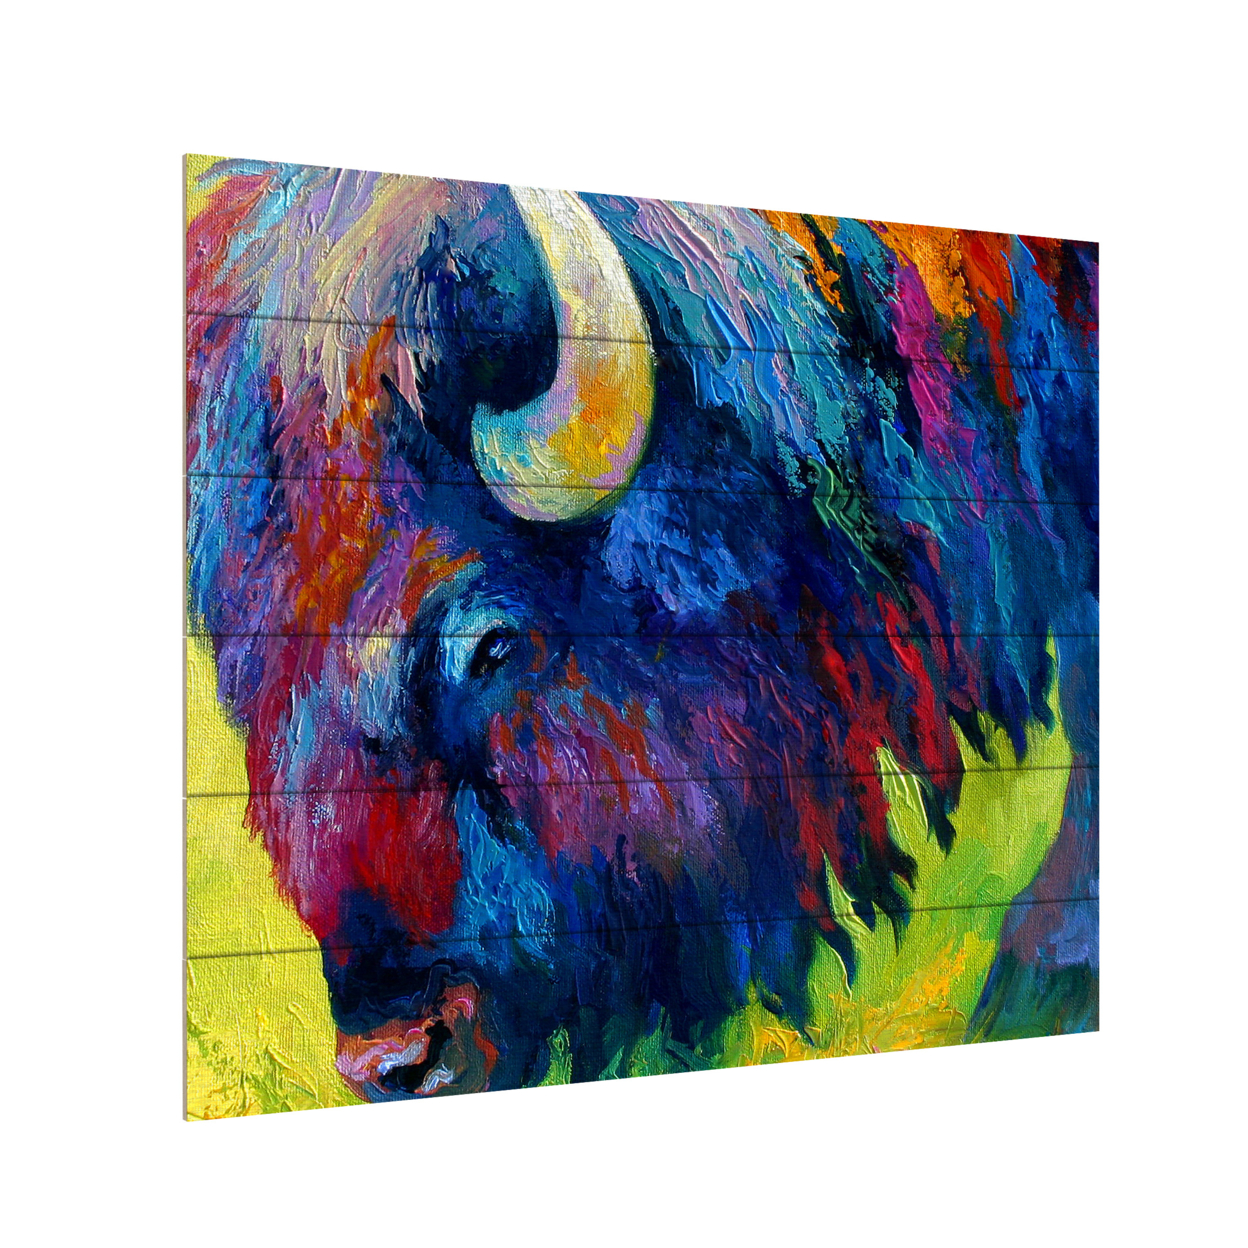 Wooden Slat Art 18 X 22 Inches Titled Bison Portrait II Ready To Hang Home Decor Picture